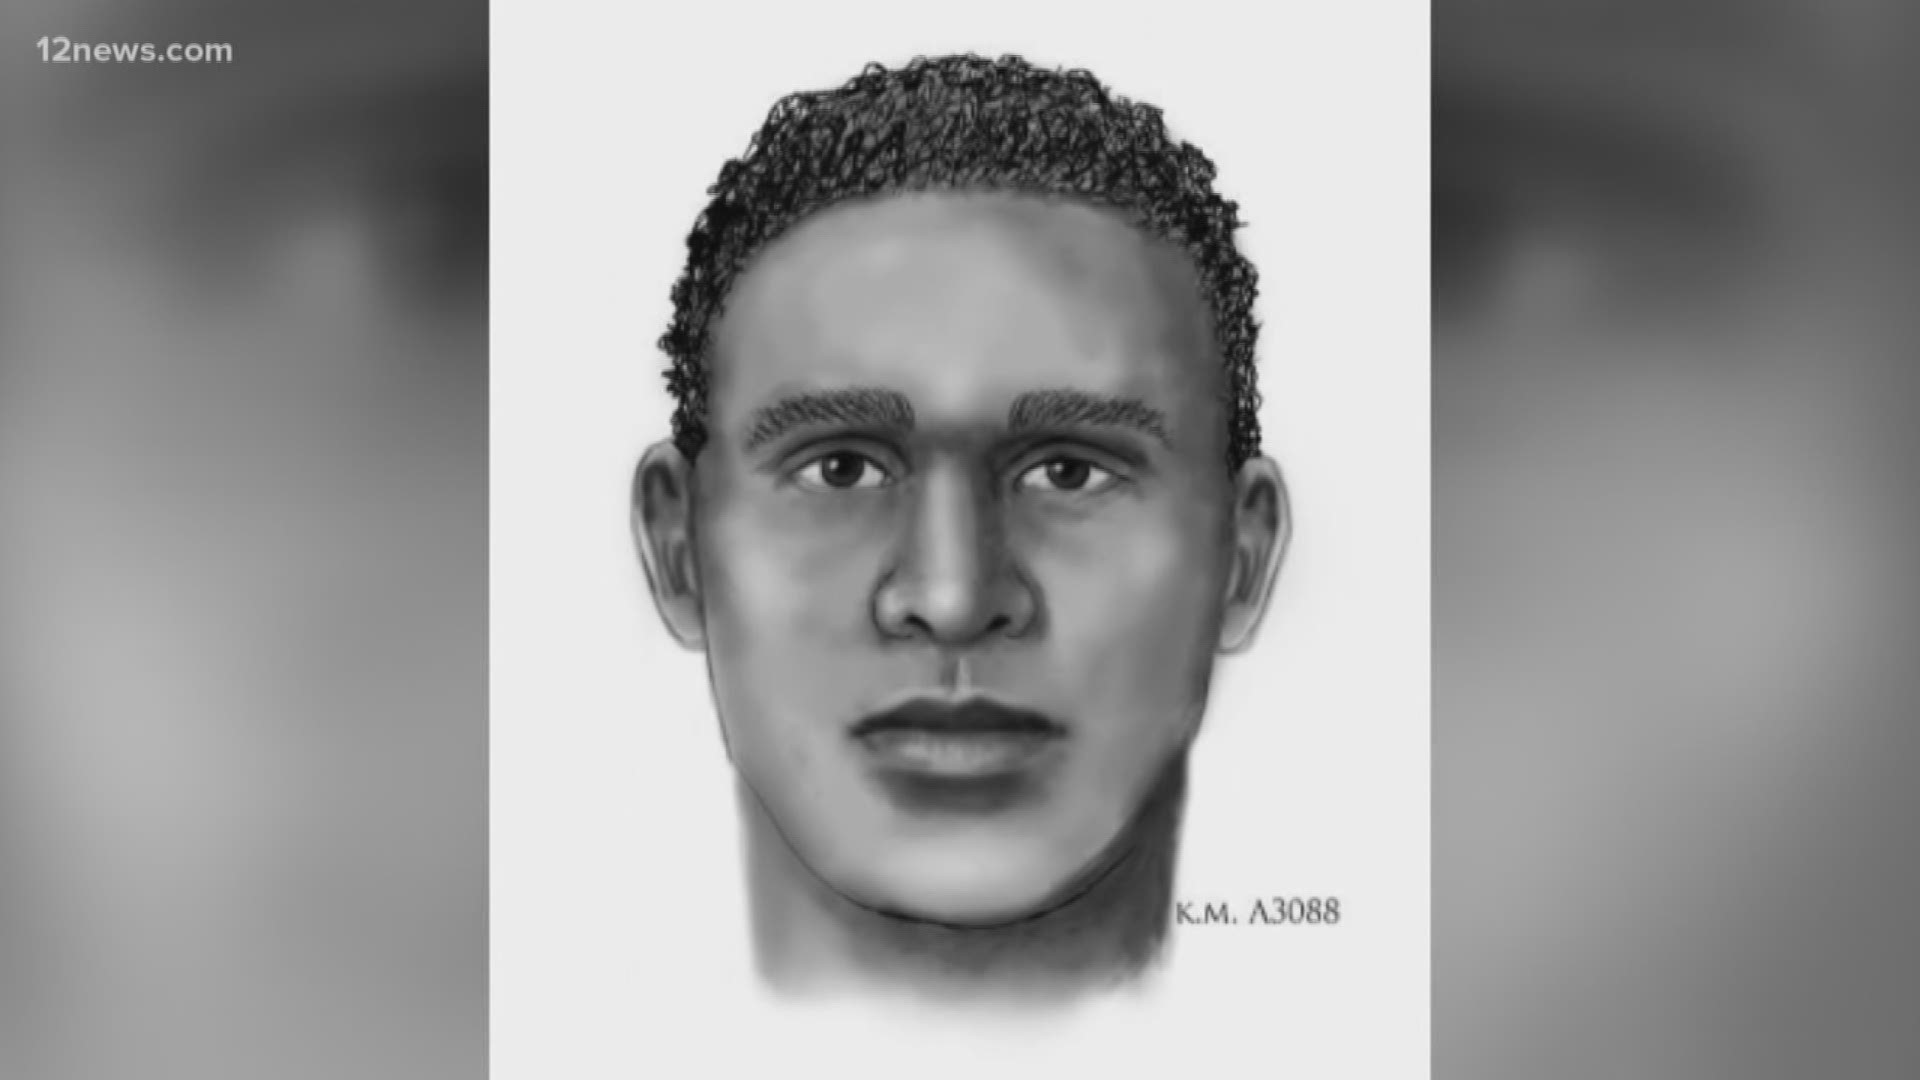 Police have just released surveillance video of three suspects running from the scene of a murder on the train tracks near Lincoln and 15th Ave. They have also released a sketch composite of who they think is the main suspect. If you have any information